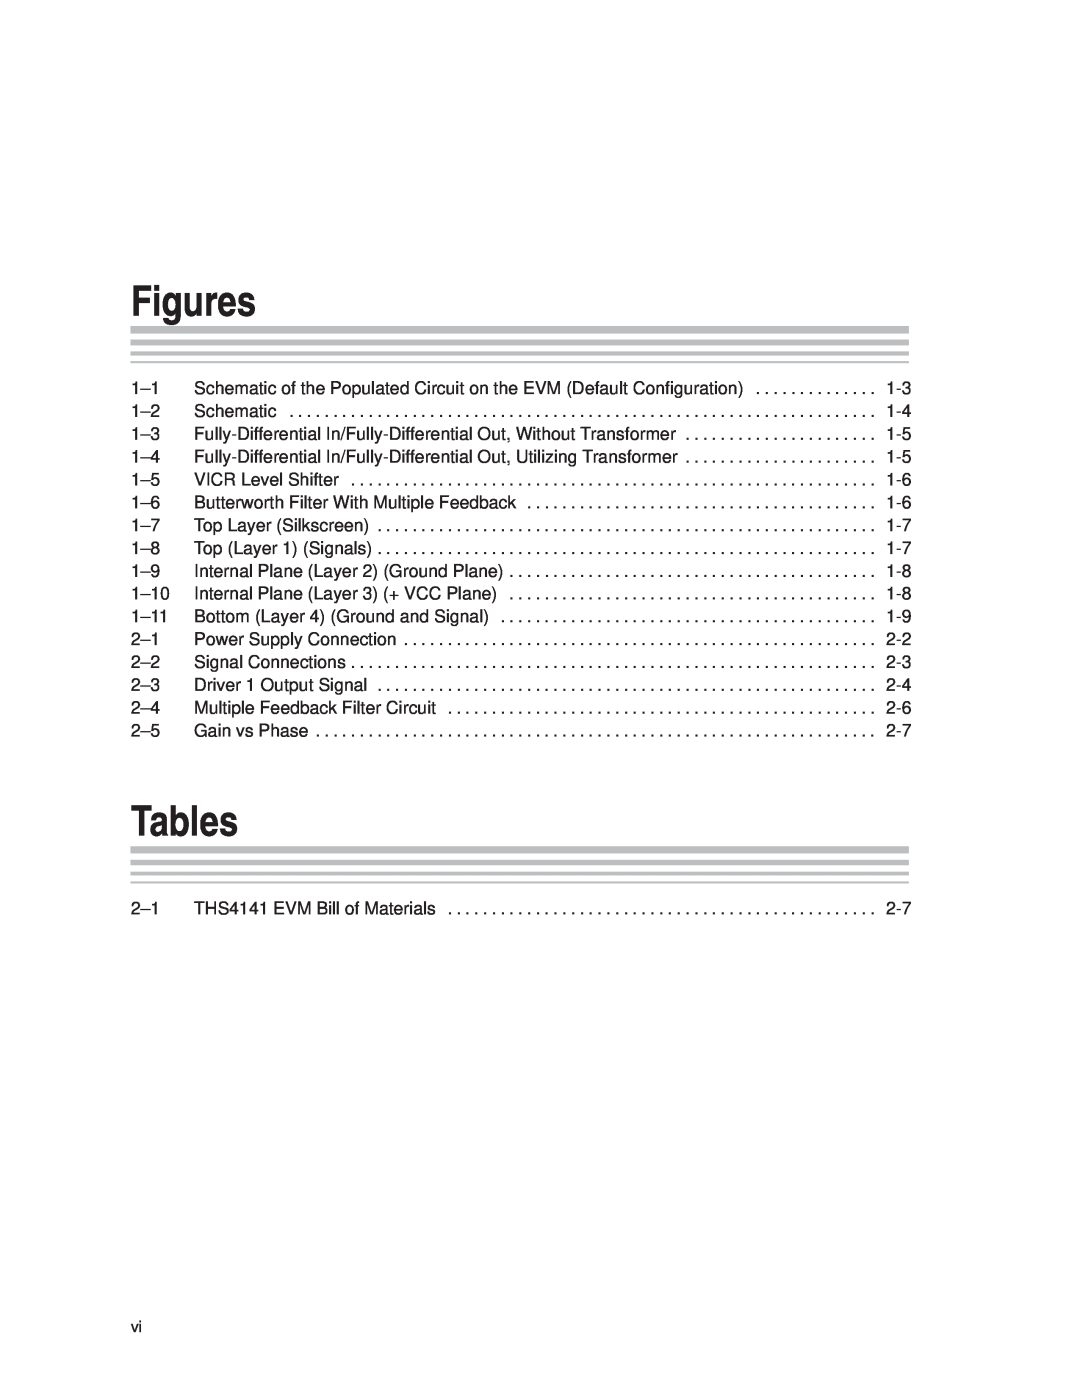 Texas Instruments THS4141 manual Figures, Tables 